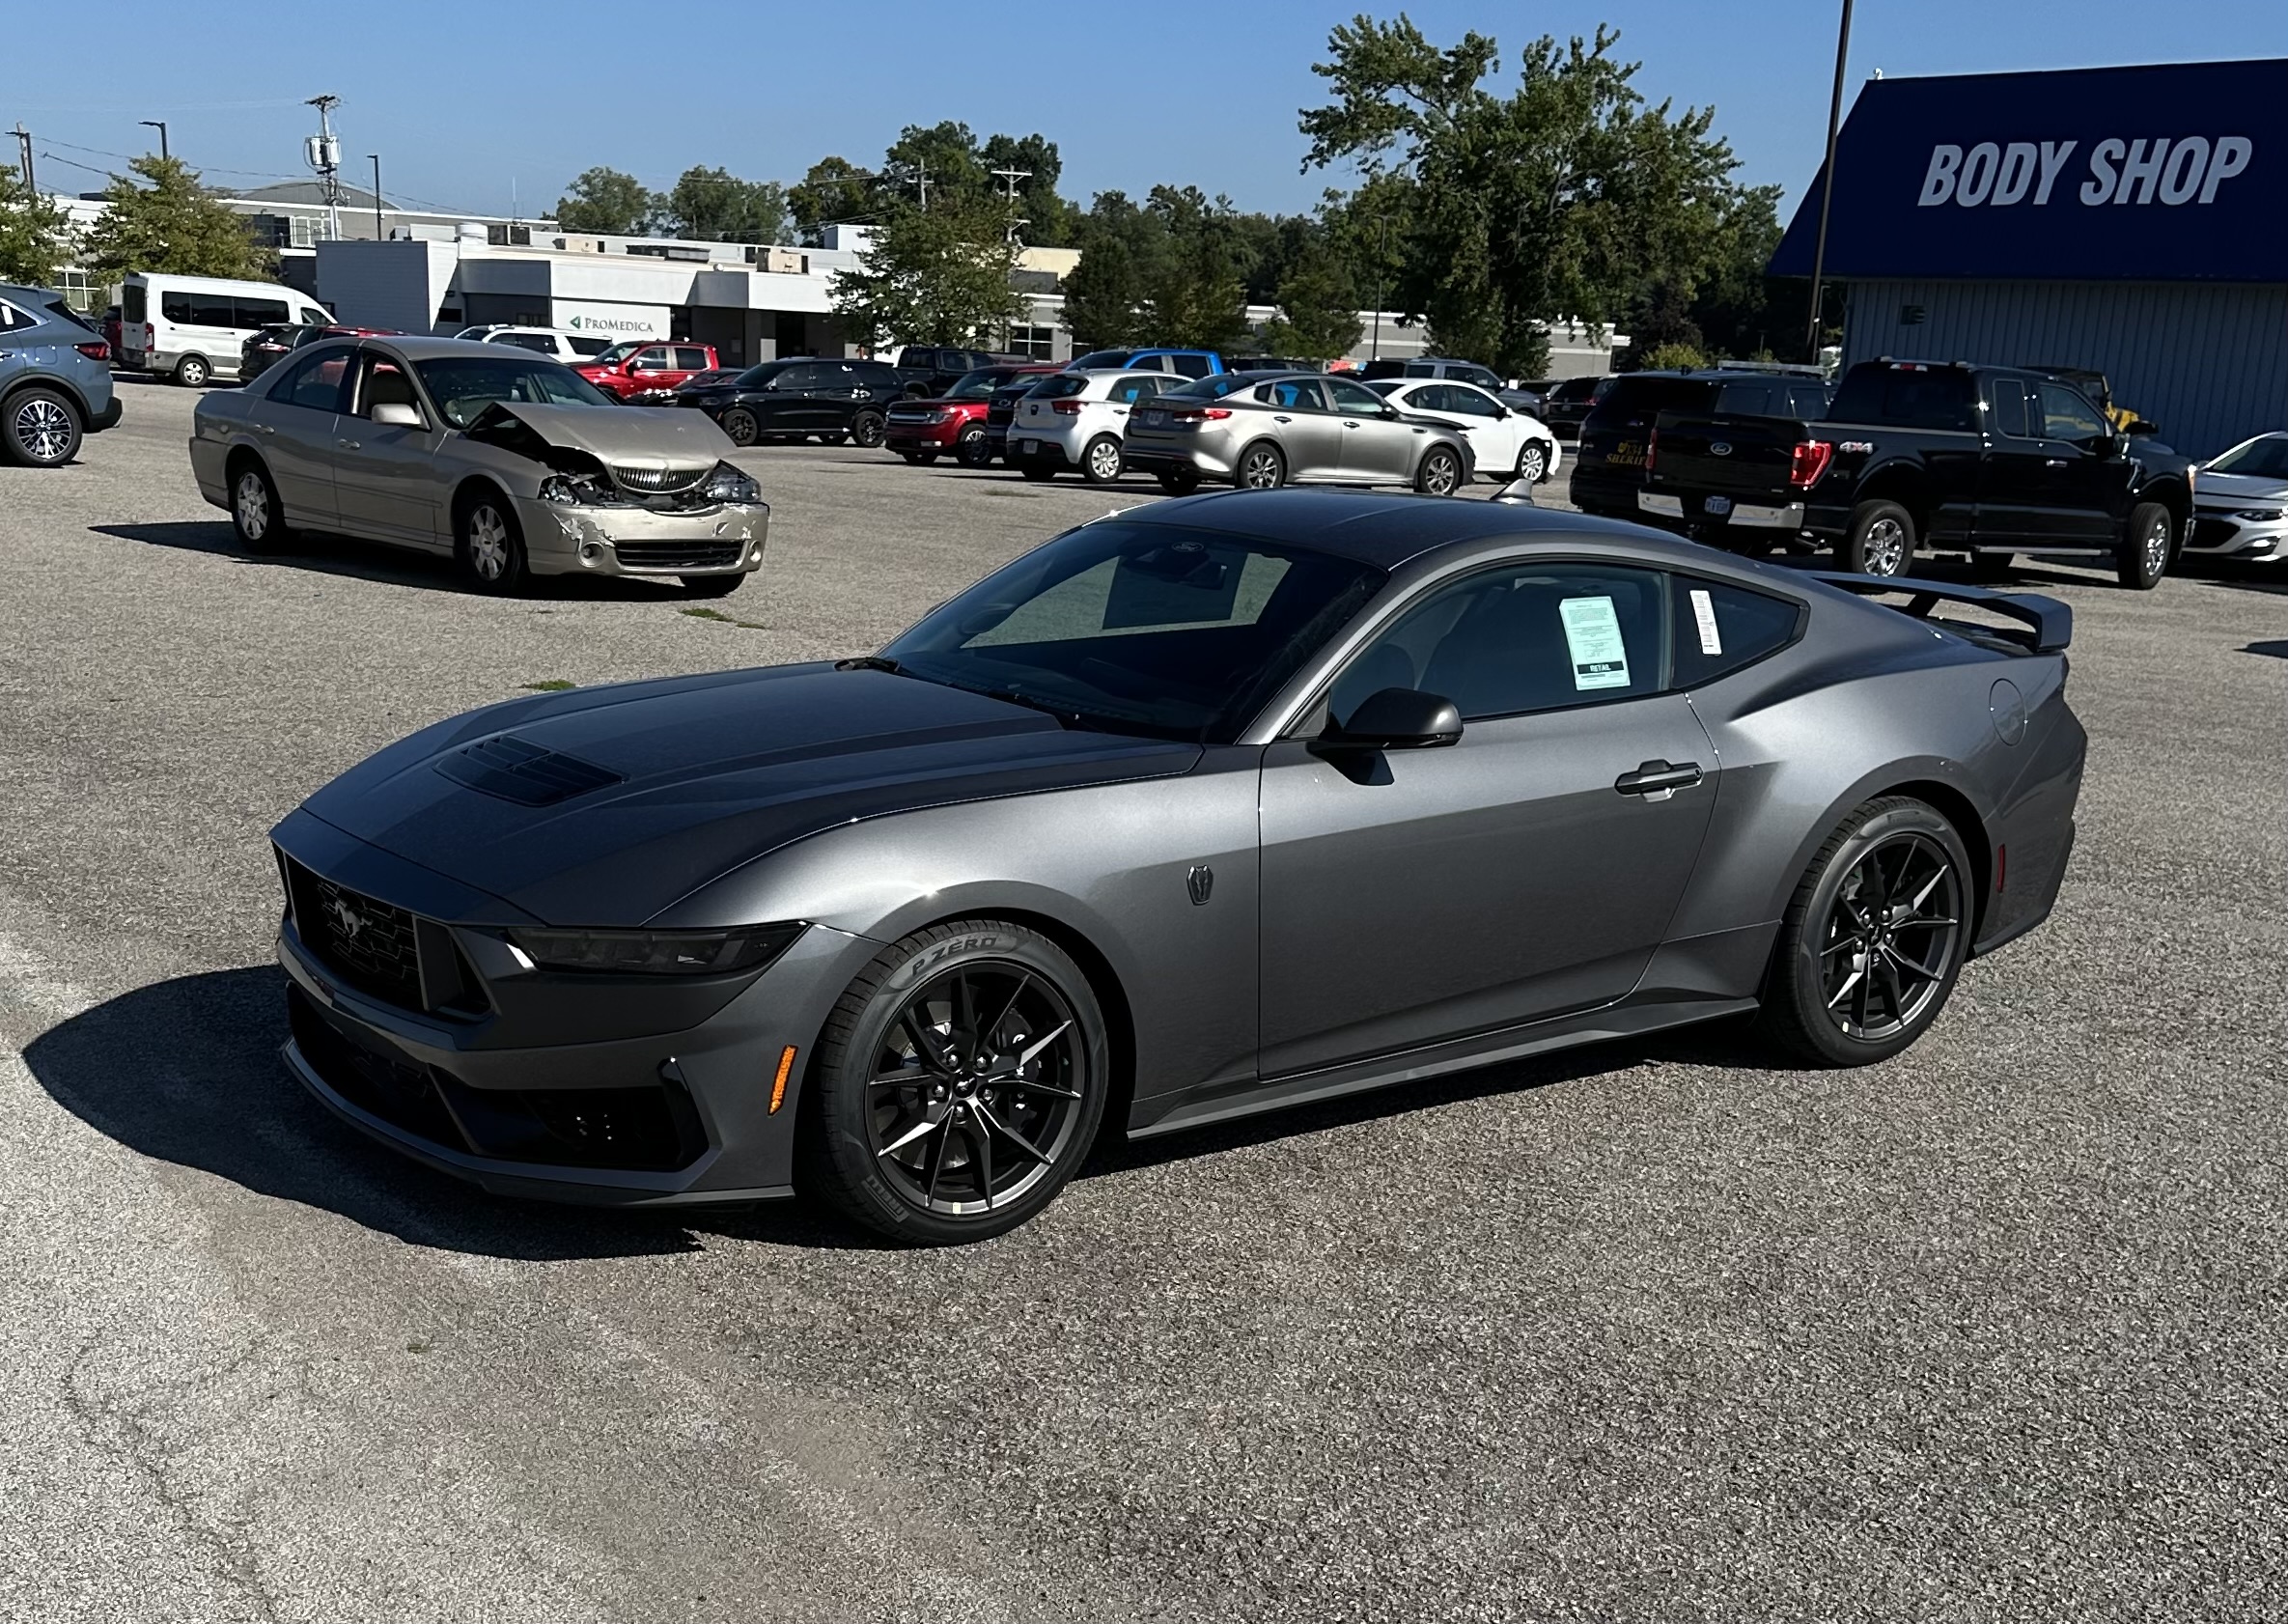 S650 Mustang Official CARBONIZED GRAY Mustang S650 Thread img_1635-jpeg-